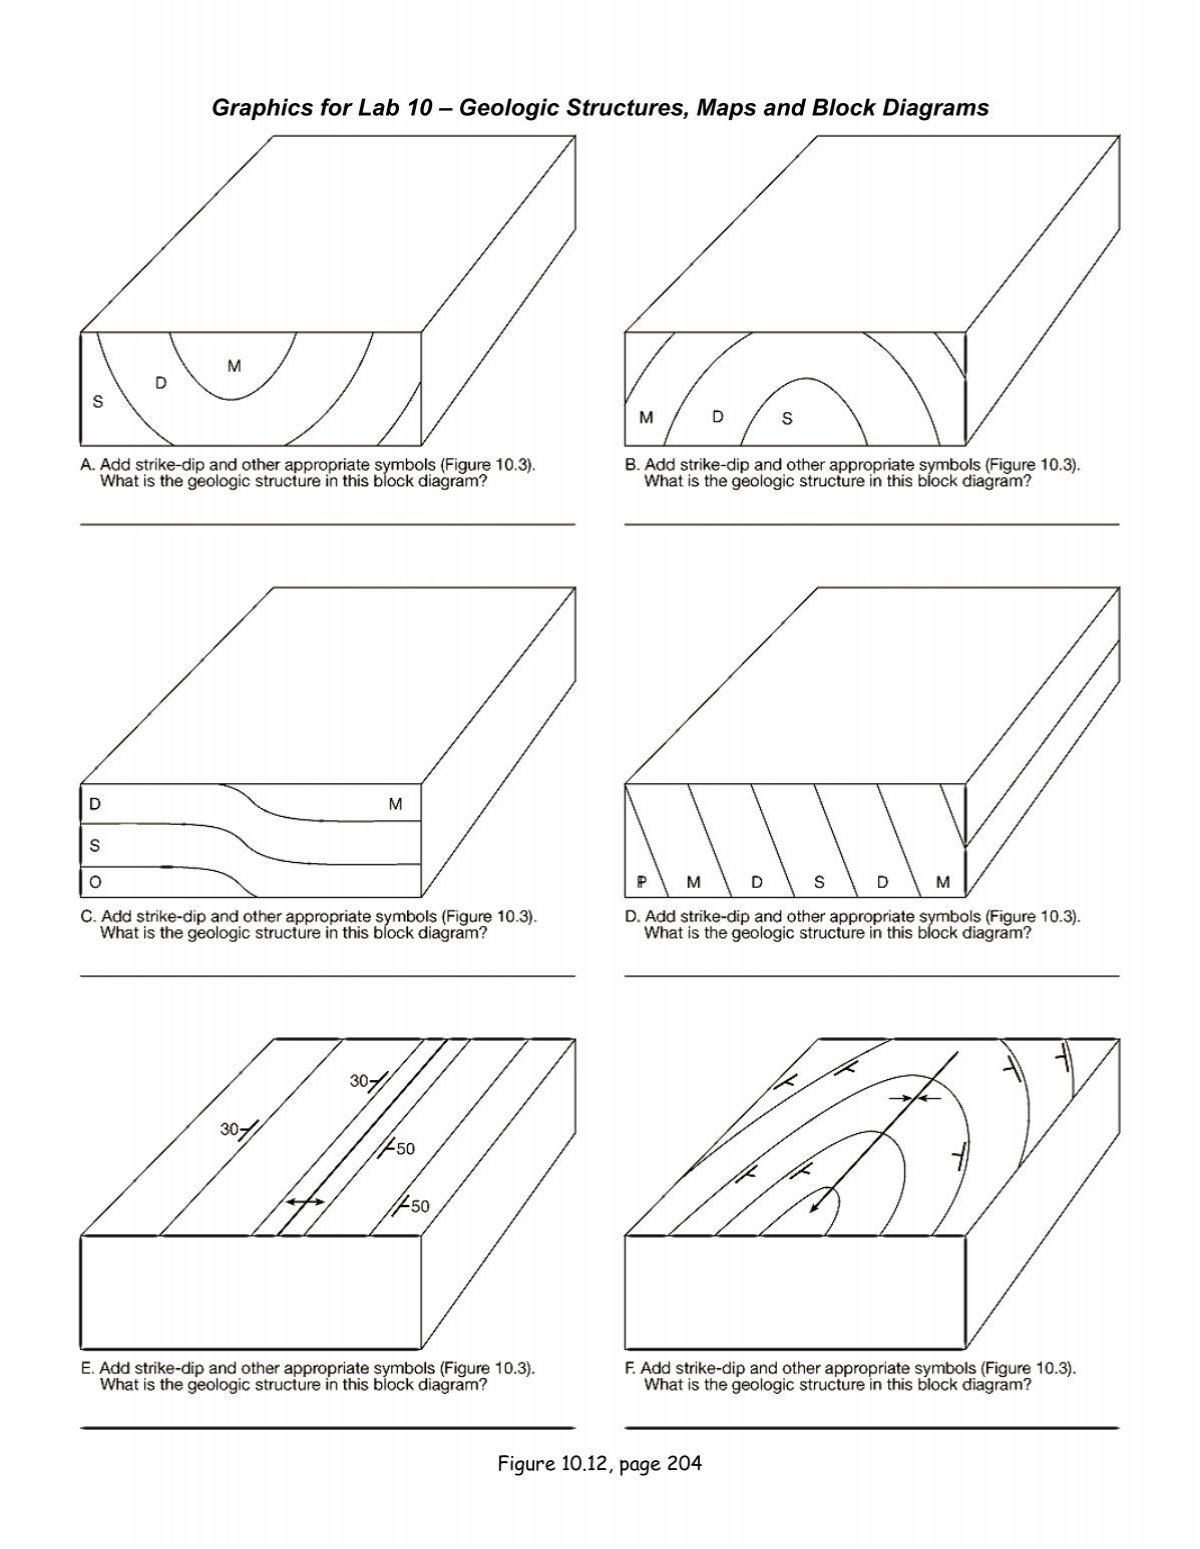 Graphics for Lab 10 â Geologic Structures Maps and Block Diagrams